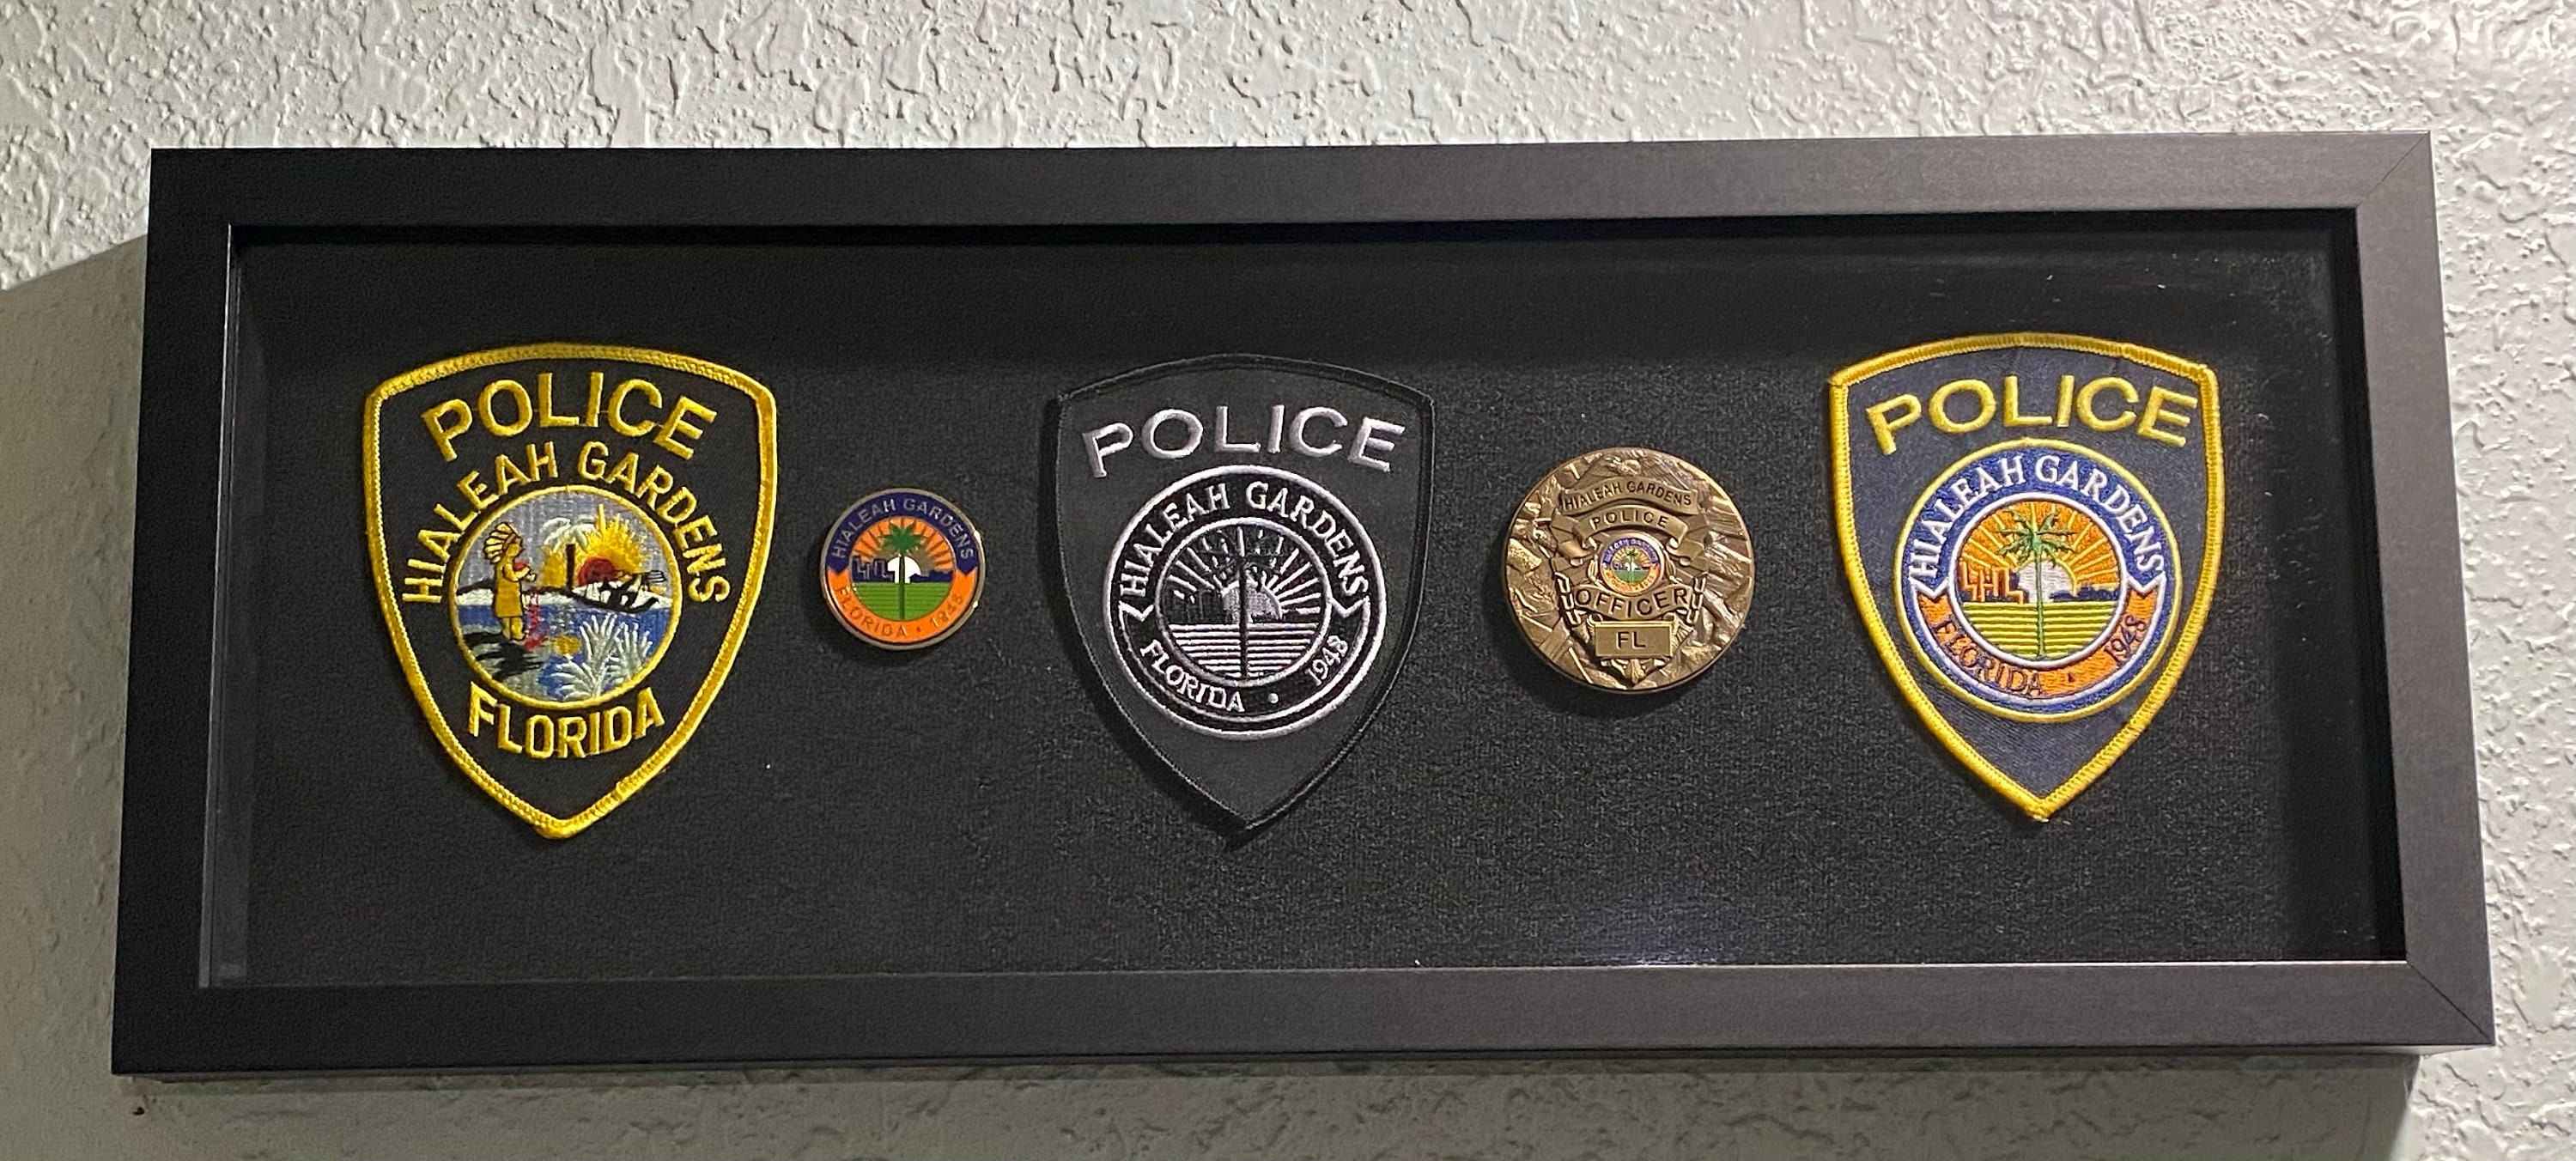 police patch display case  Patches display, Police patches display, Patch  quilt